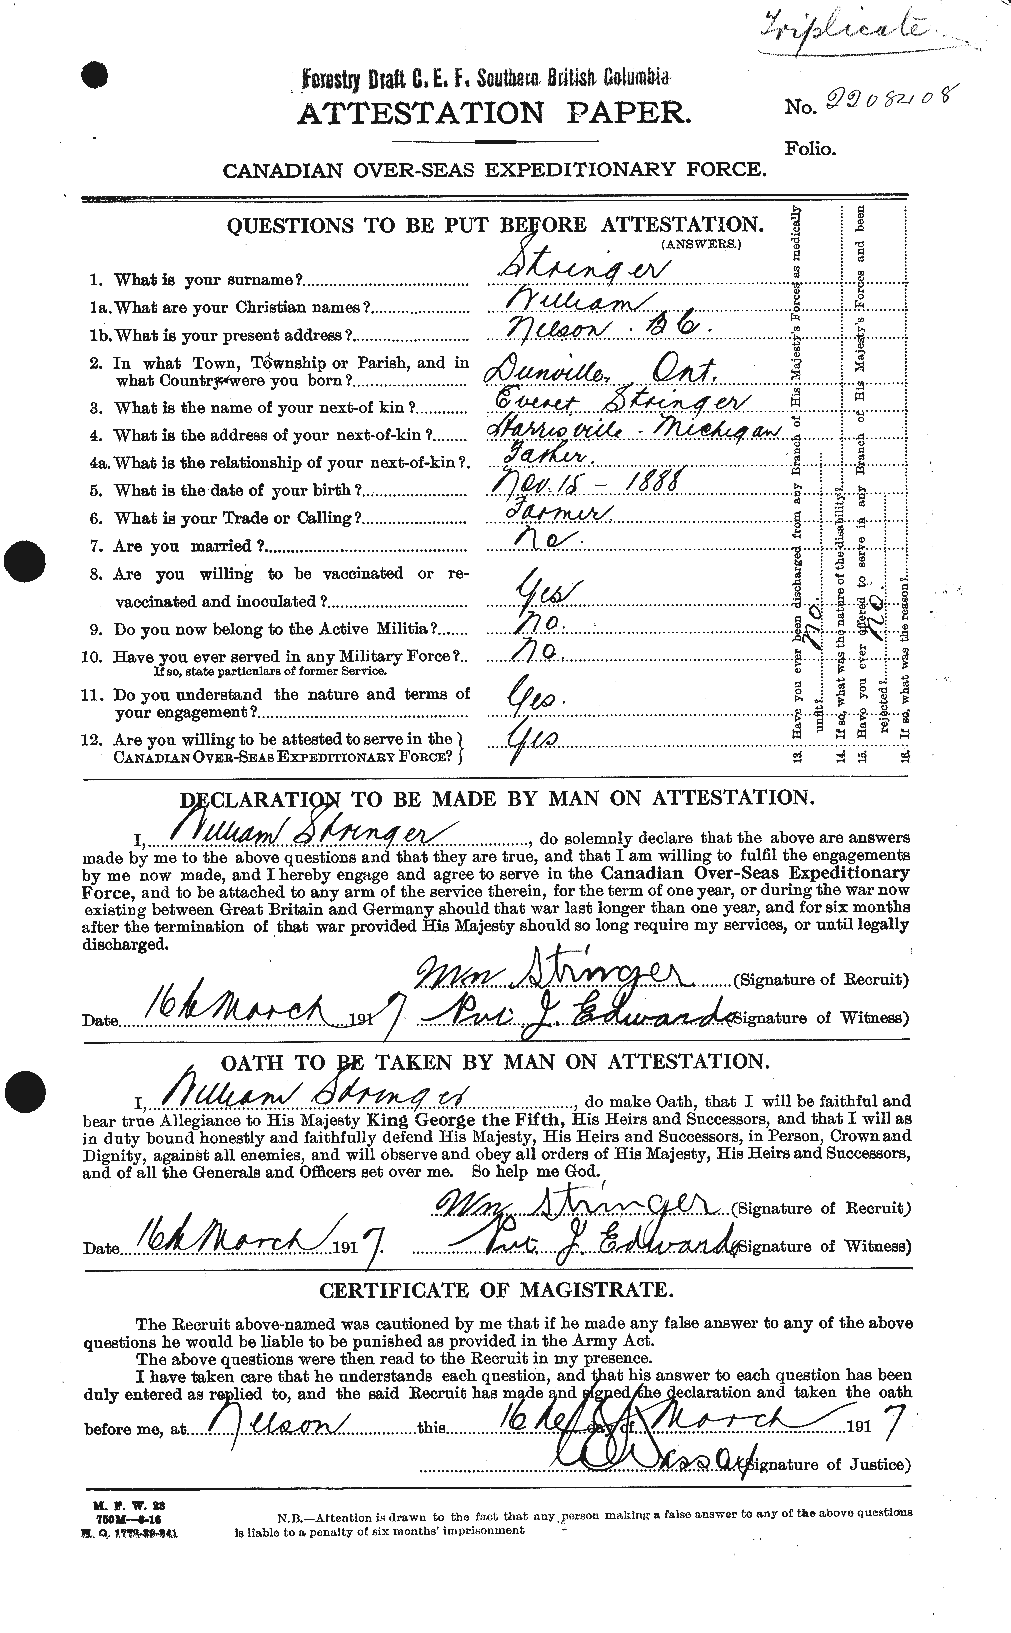 Personnel Records of the First World War - CEF 124509a